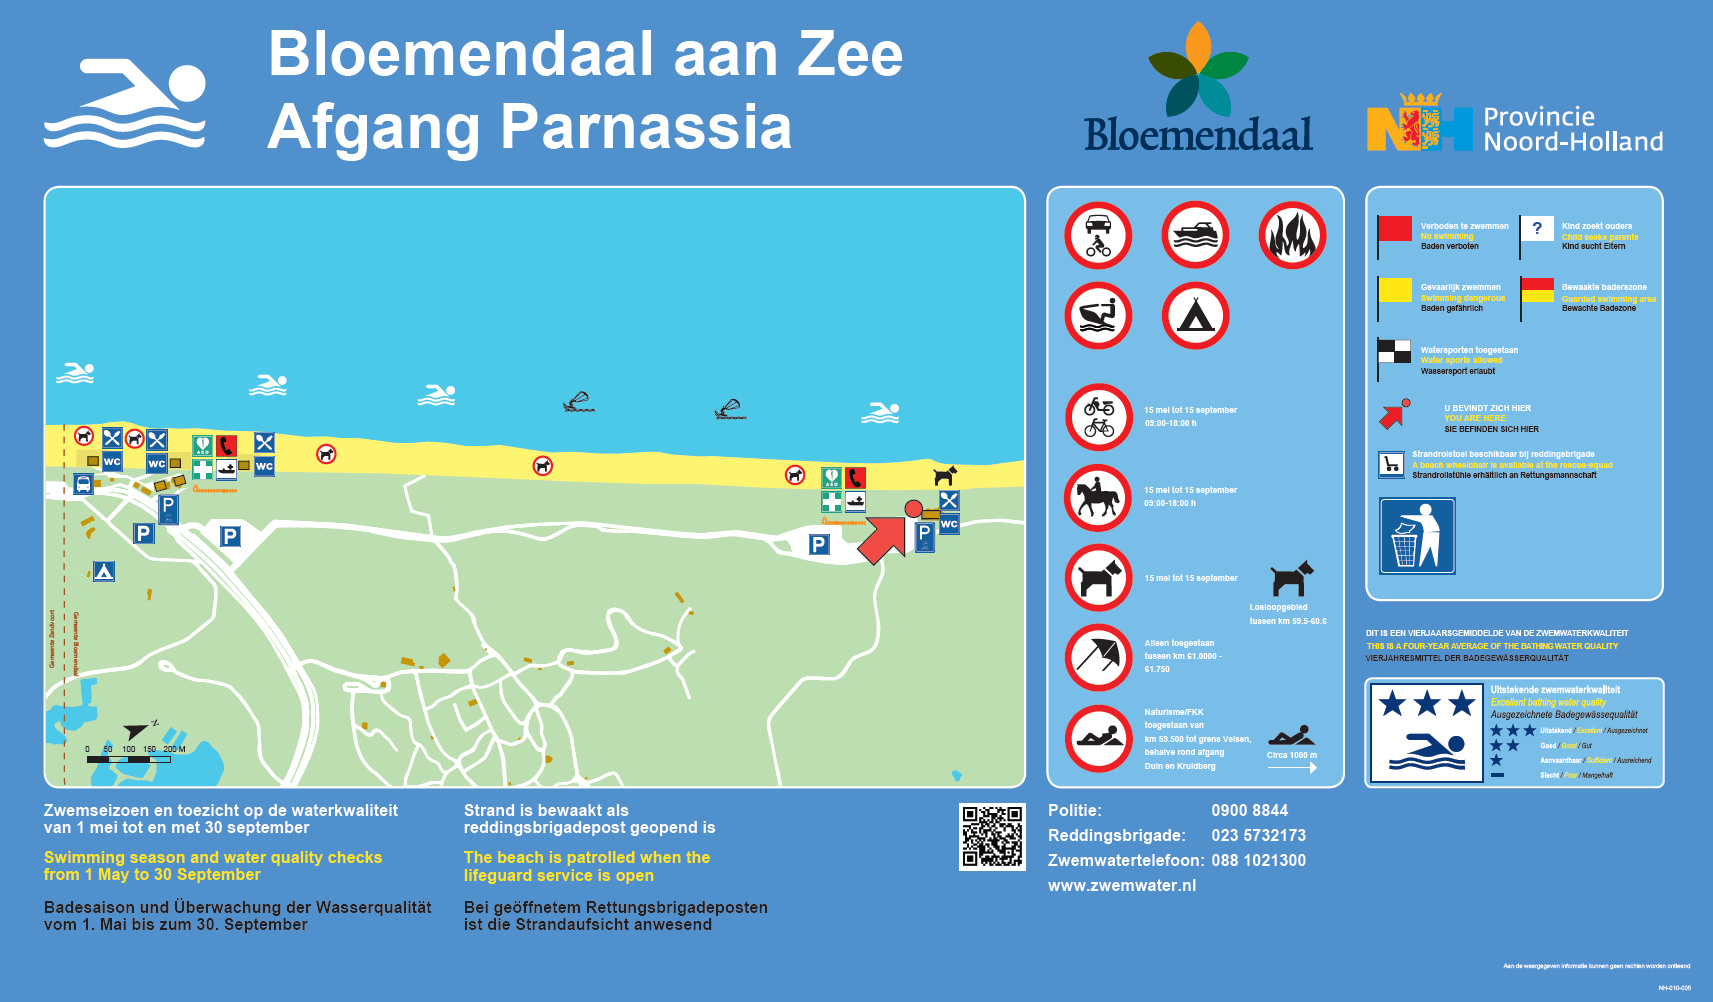 The information board at the swimming location Bloemendaal aan Zee, Afgang Parnassia